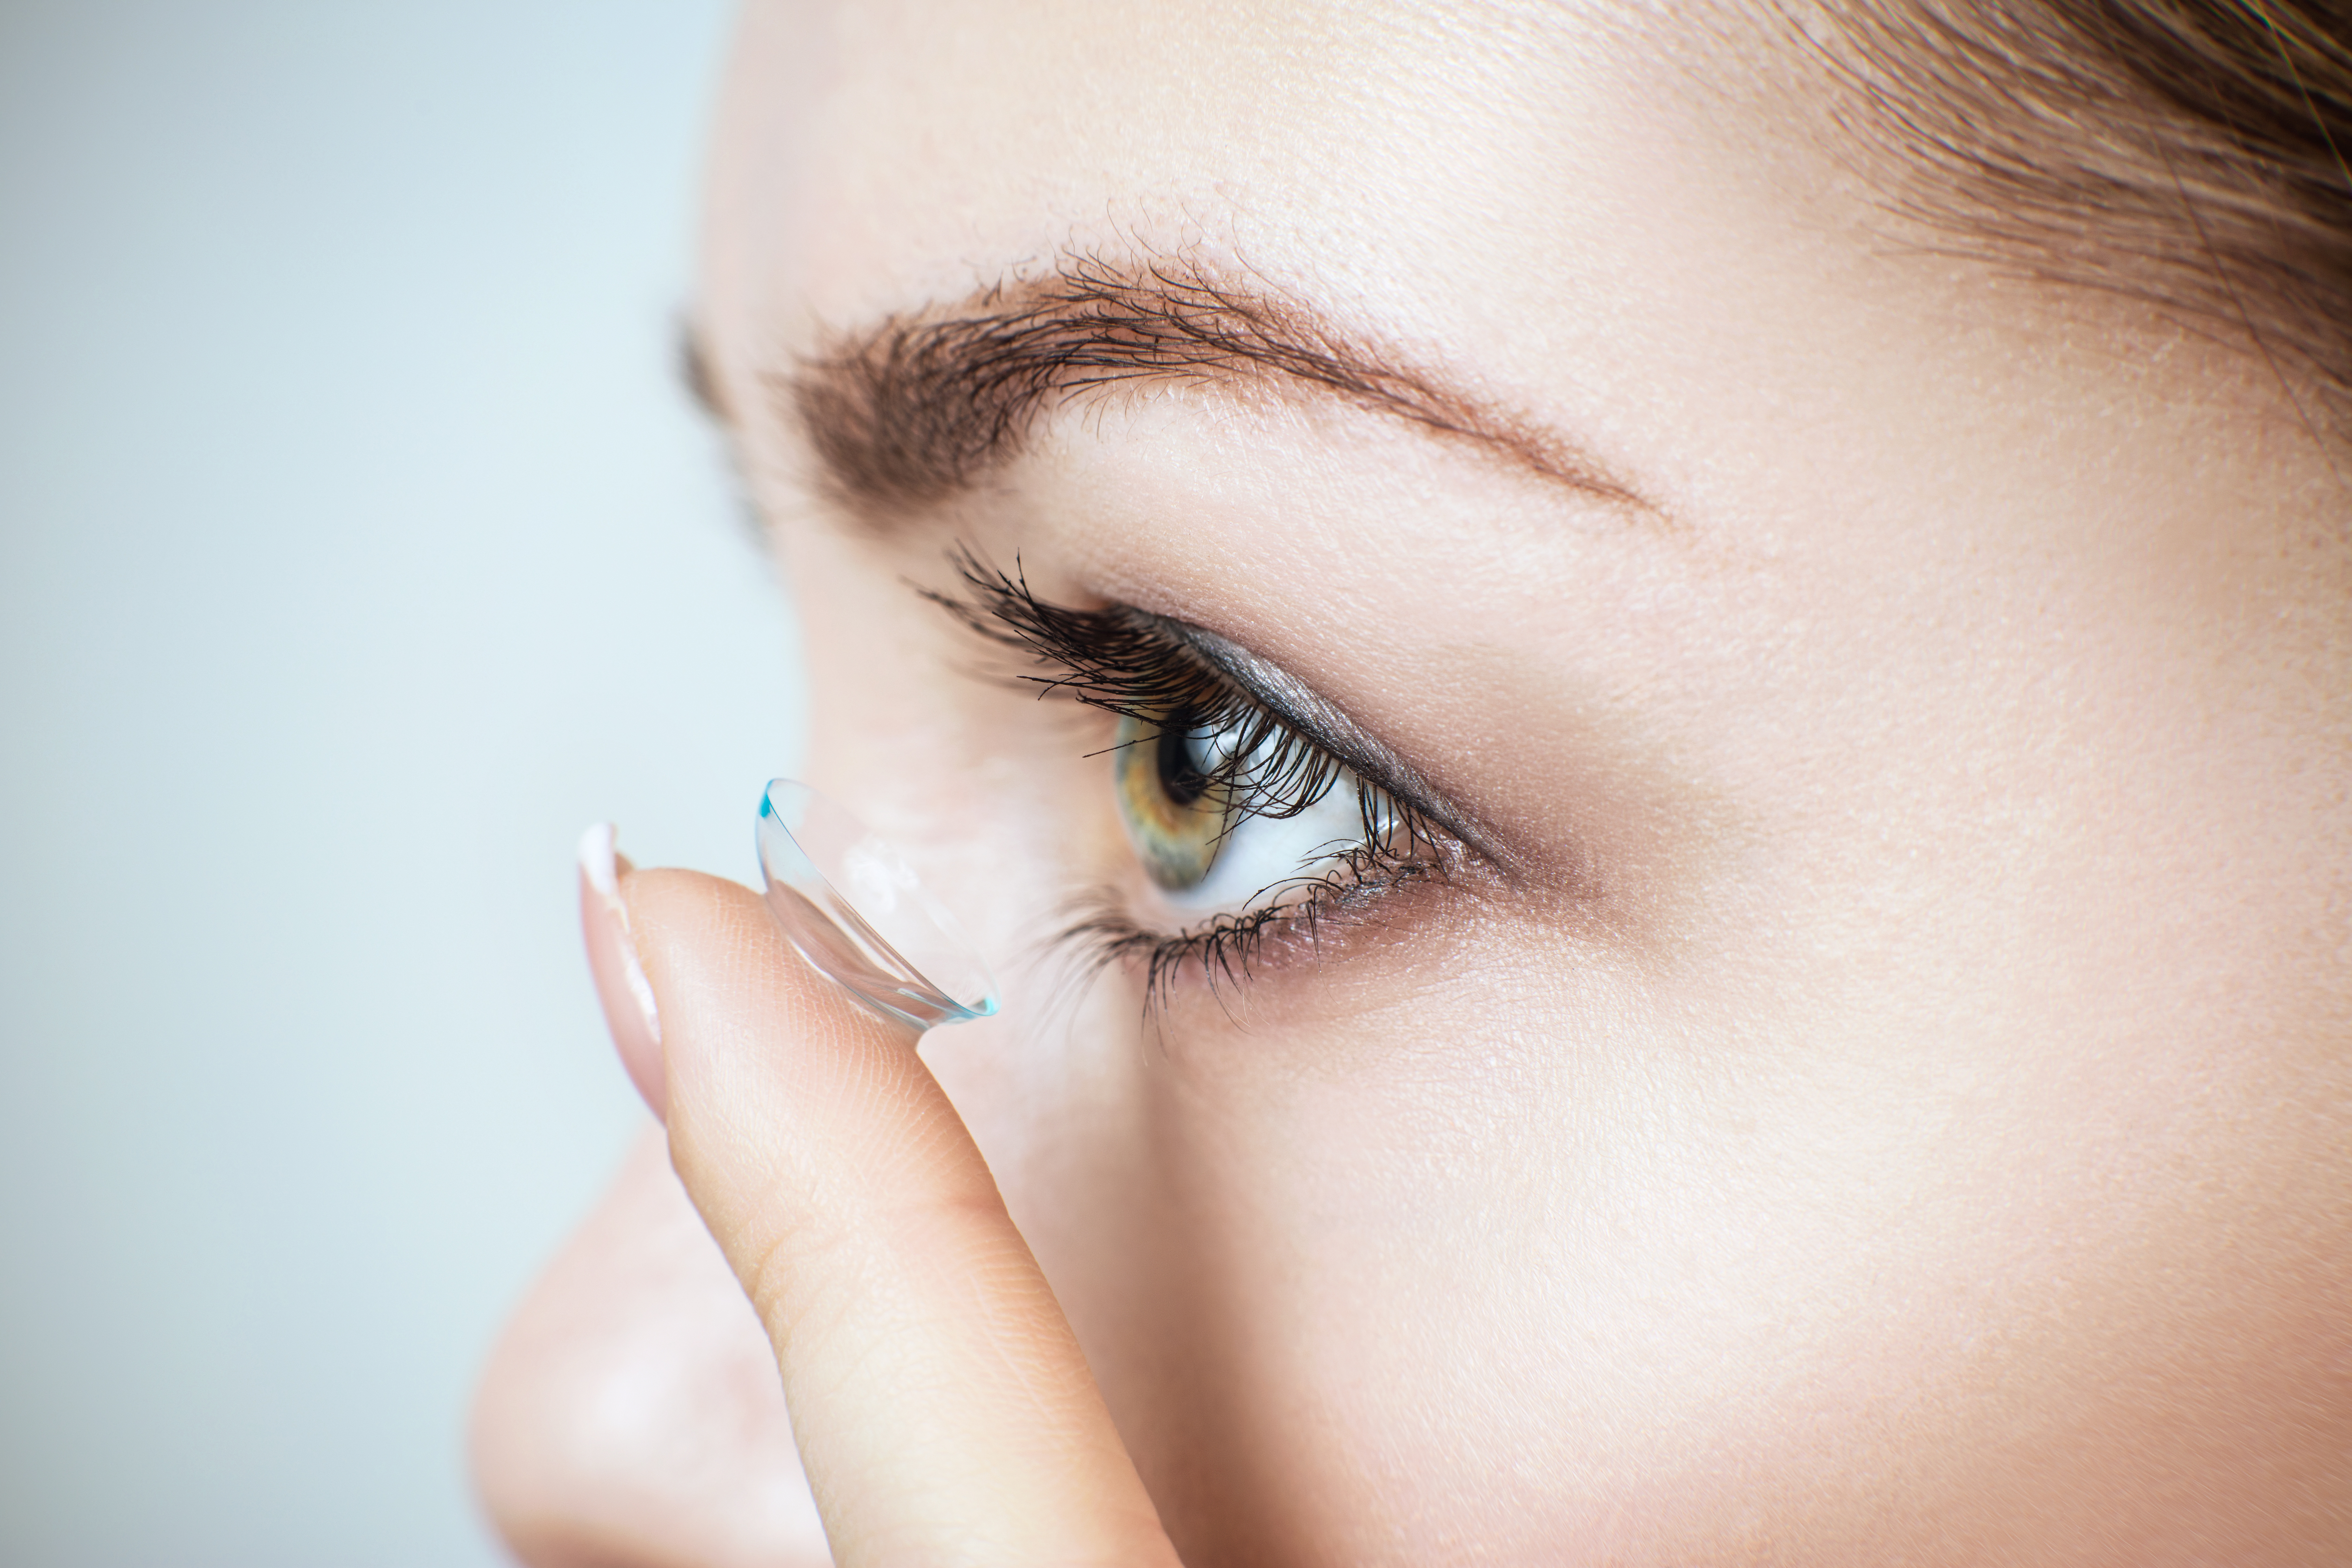 Contact Lens Care and Safety